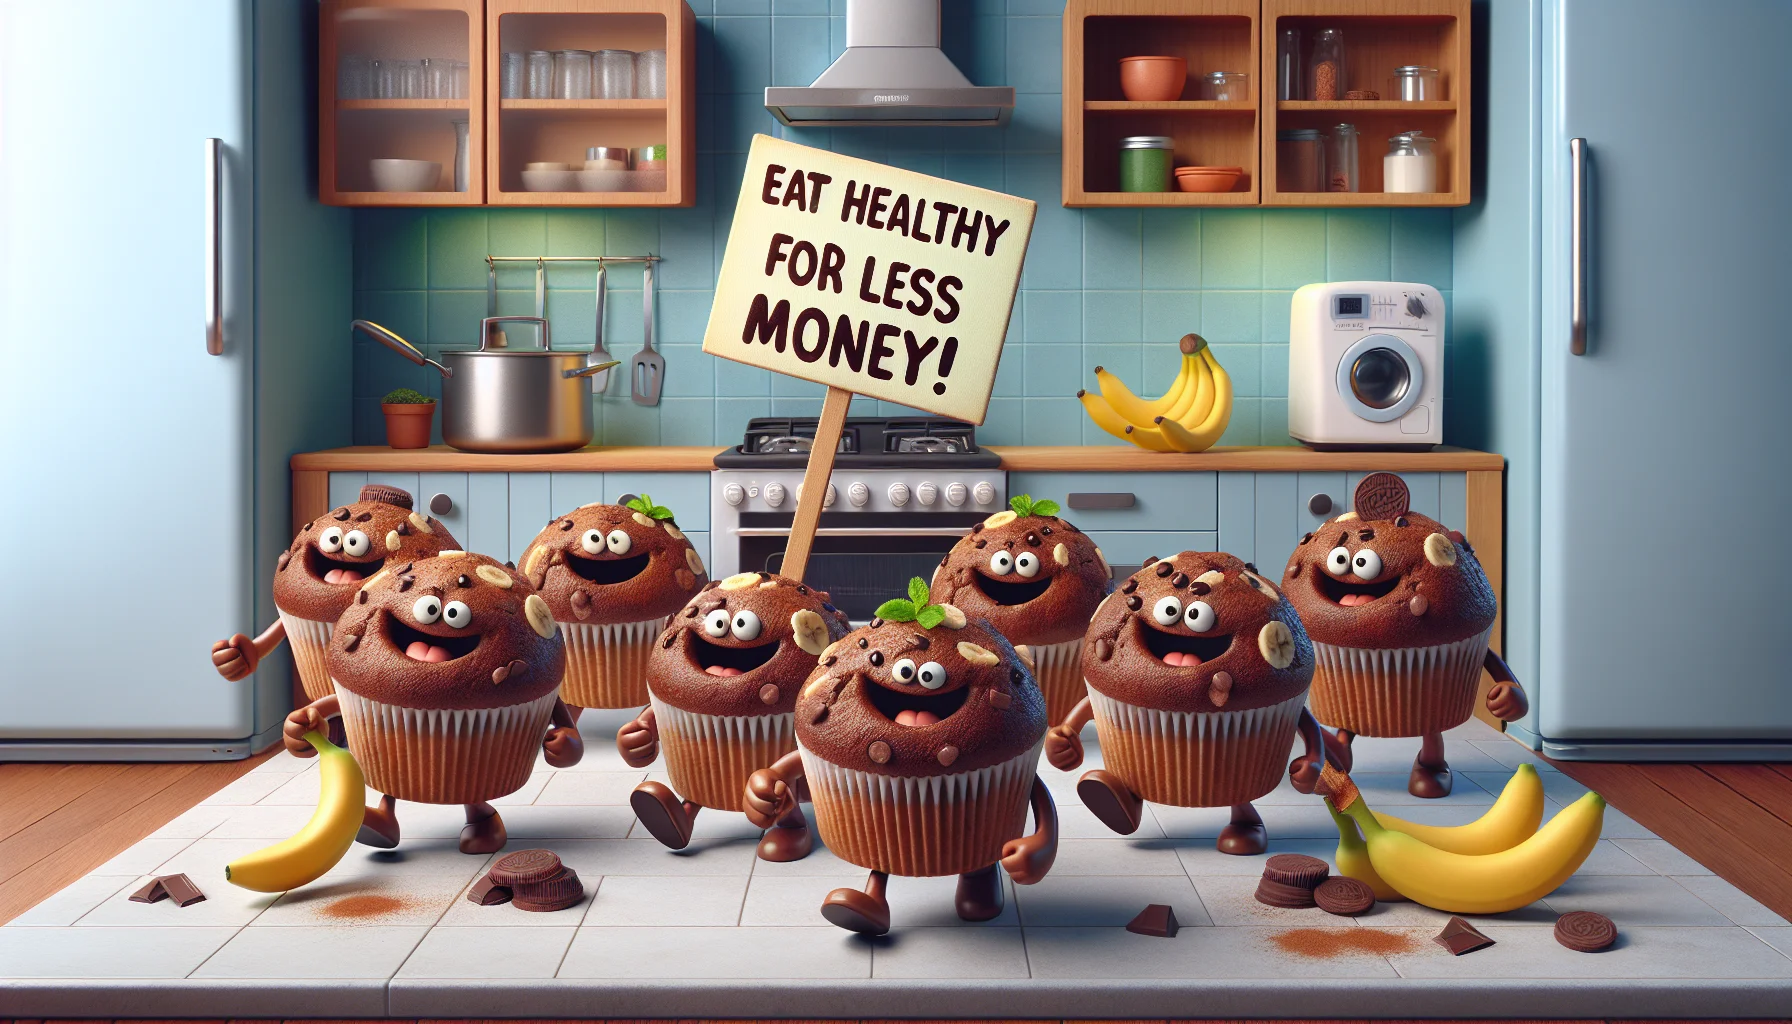 A humorous and realistic illustration of an unexpected scene featuring delectable chocolate banana cinnamon muffins. They are personified, with cheerful faces and seem to be holding signs saying 'Eat Healthy for Less Money!'. They are engaging in a parody of a street protest, marching around a kitchen setting, with appliances like an oven, blender, and refrigerator amusedly watching them. The muffins are enticingly textured, with visible chunks of banana and a sprinkling of cinnamon. The message is to promote healthy eating at an affordable price tag, in a light-hearted and appetizing way.